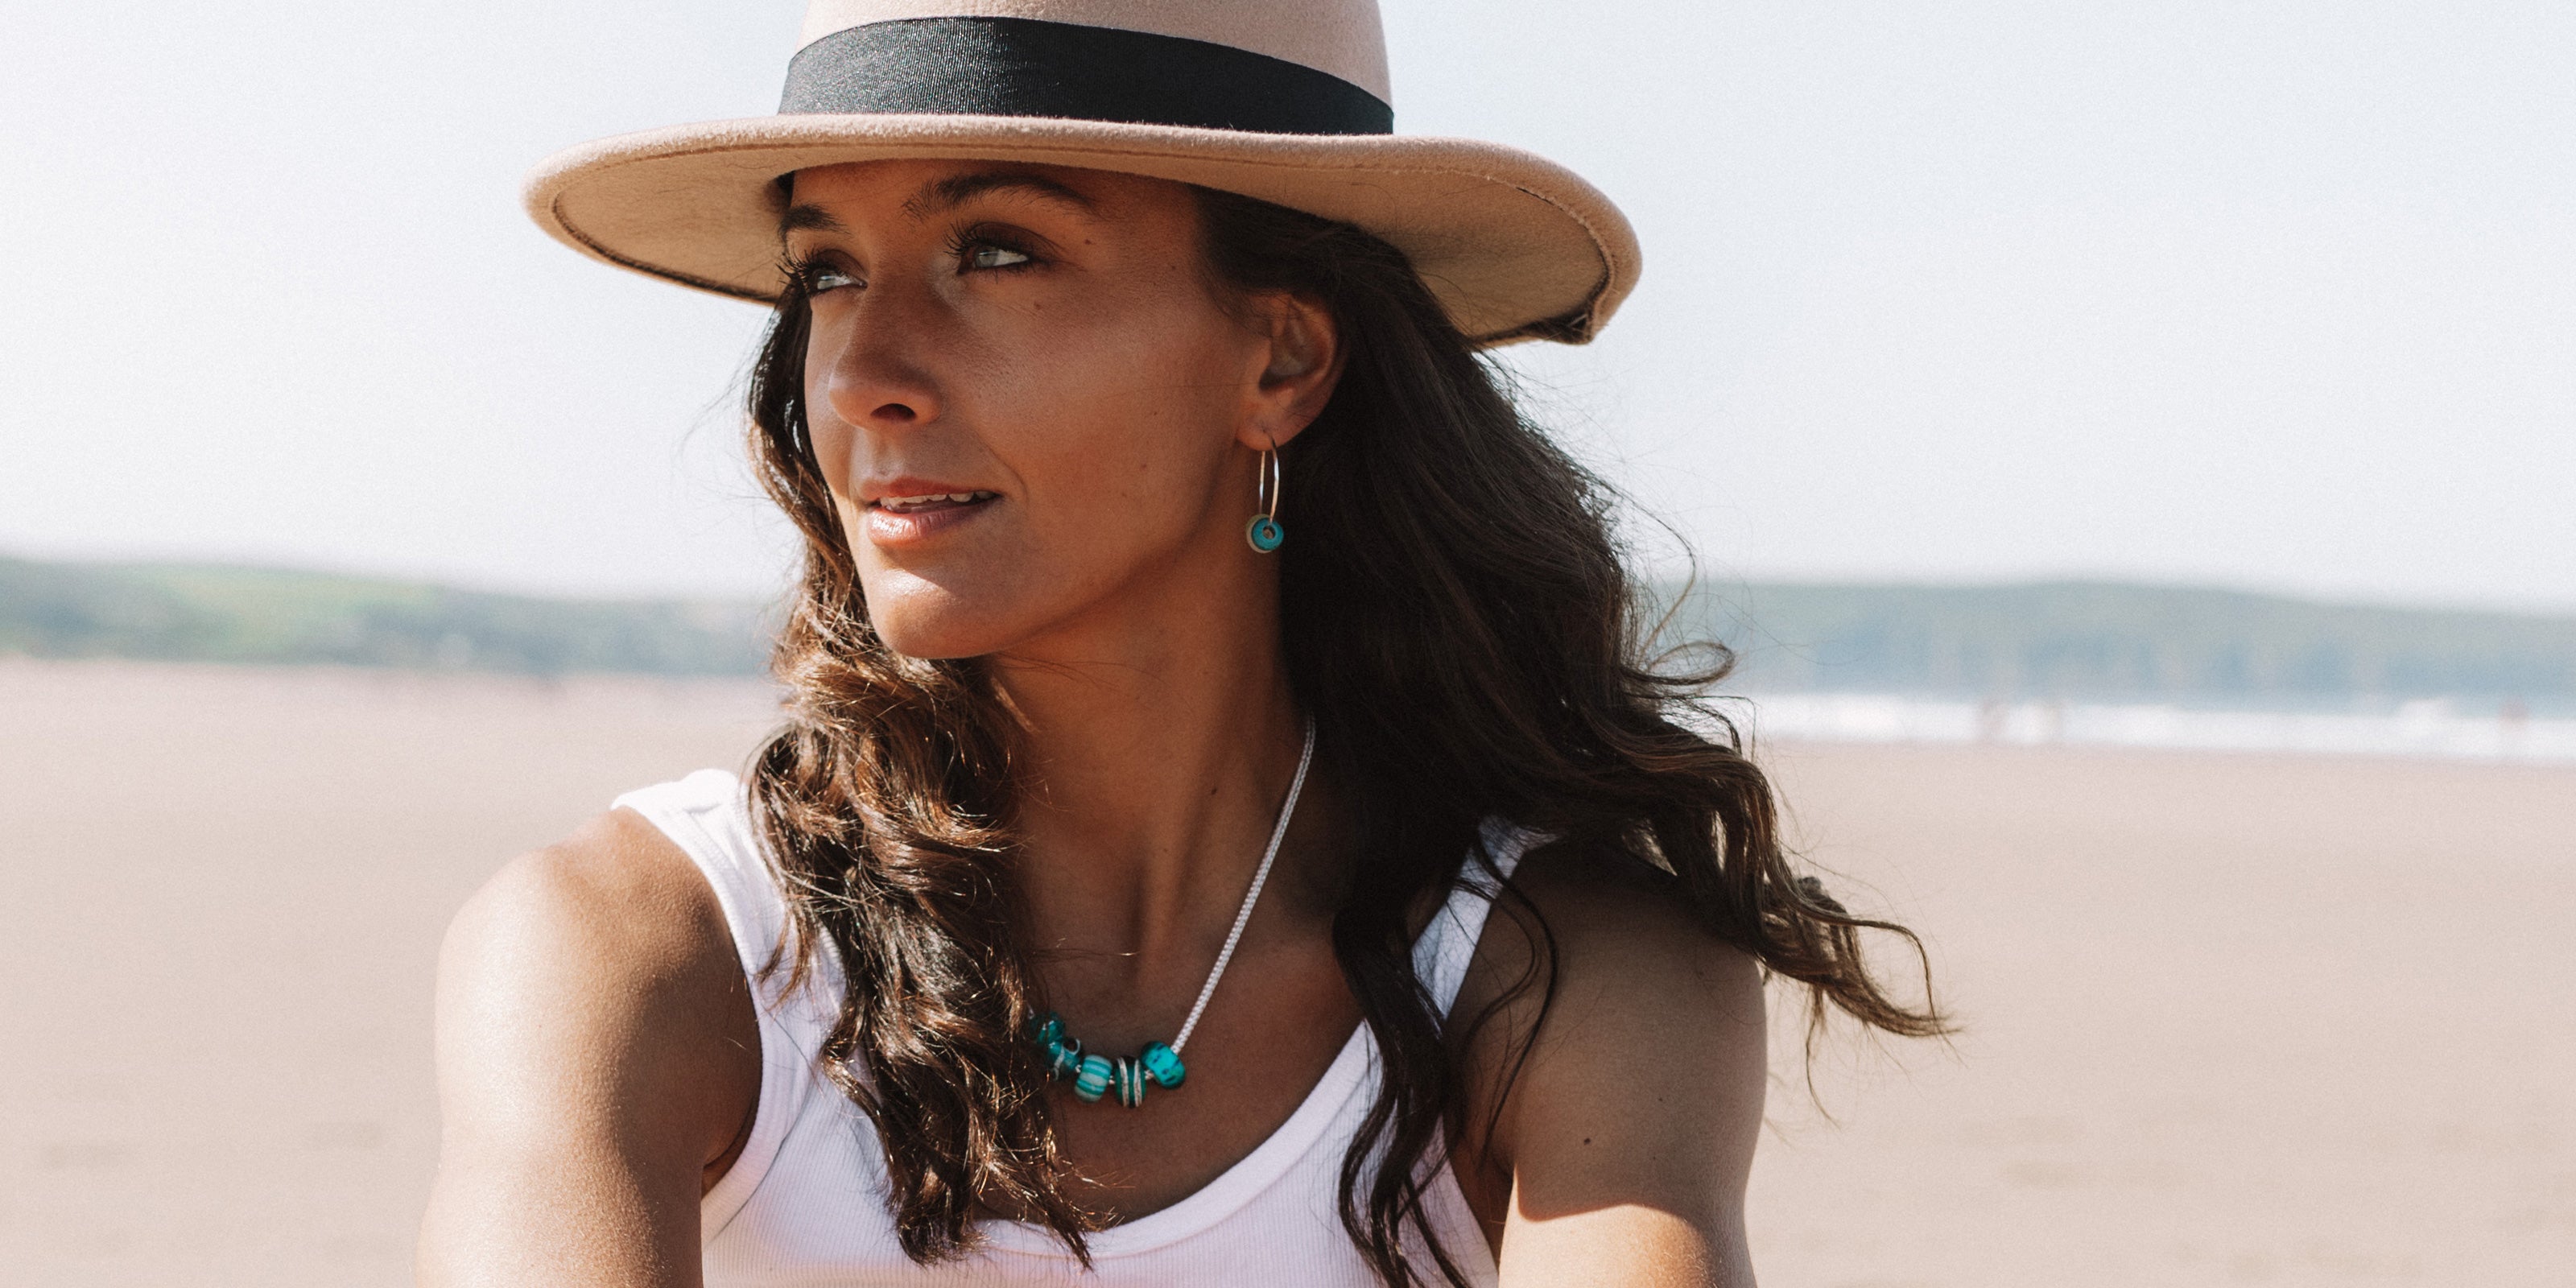 Girl on beach wearing hat and sterling silver beads and earrings on the beach.